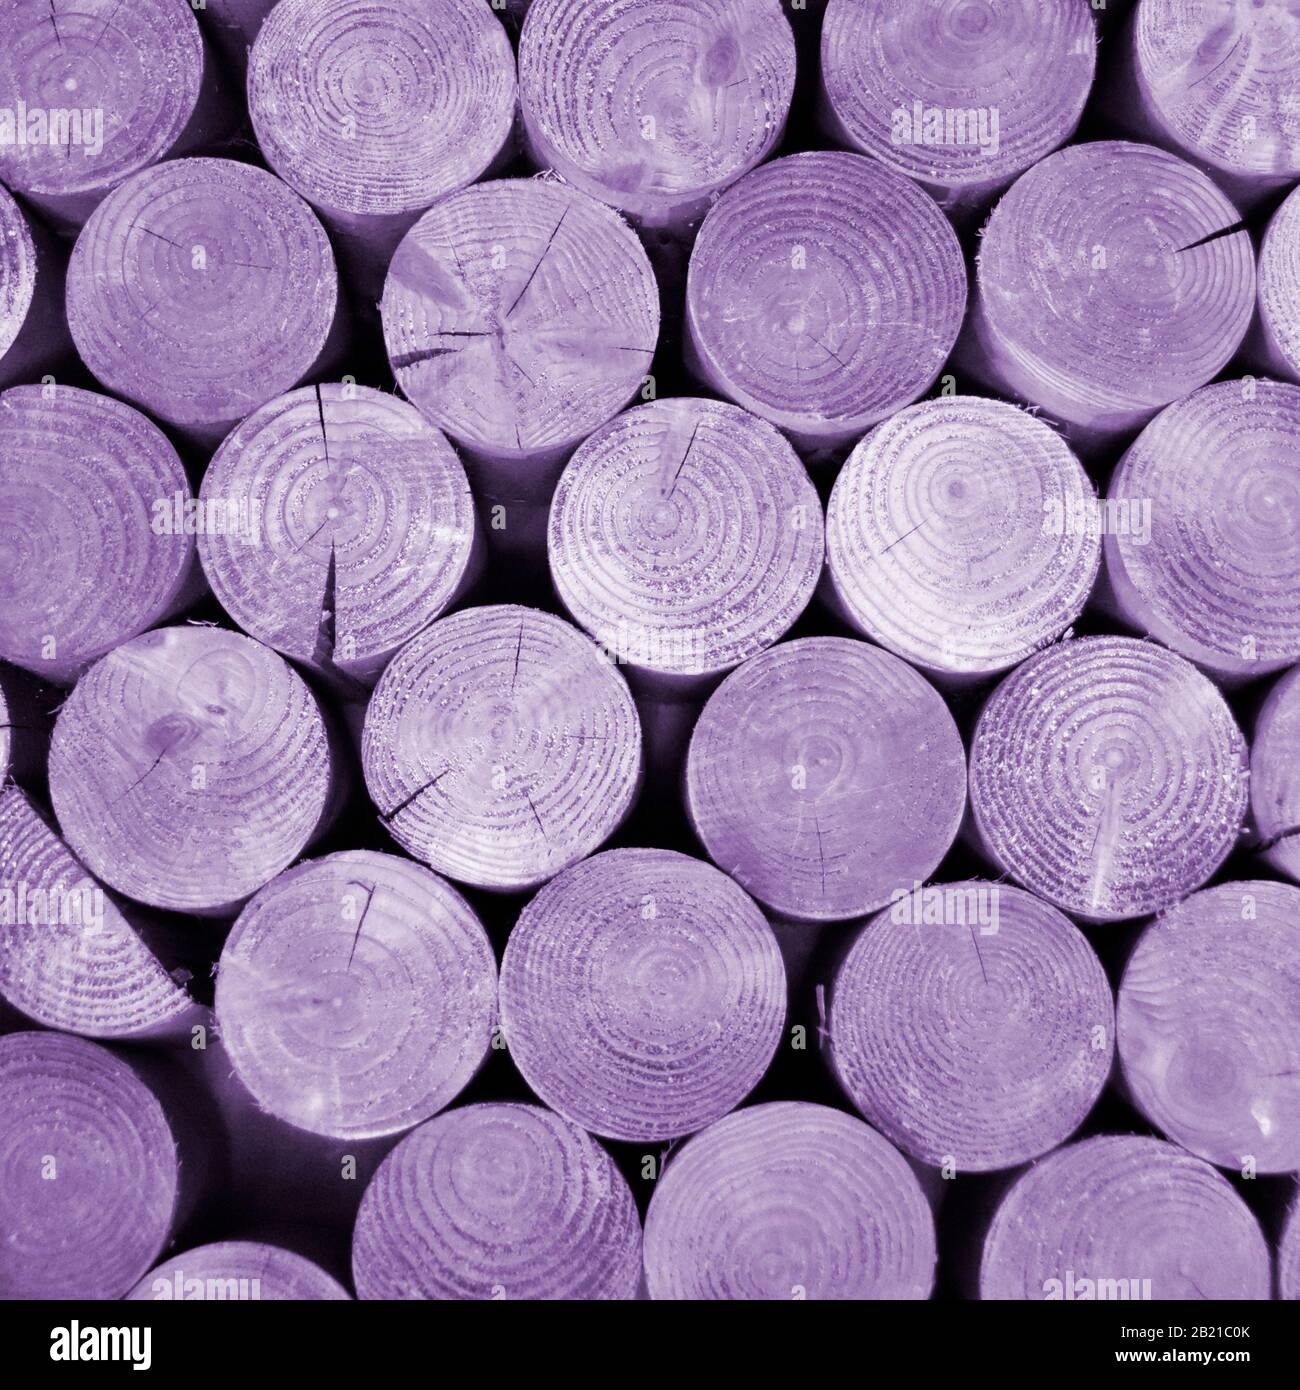 Manipulated colour applied to ends of stacked sawn tree timber logs to create abstract background pattern image of round shapes and circles England UK Stock Photo